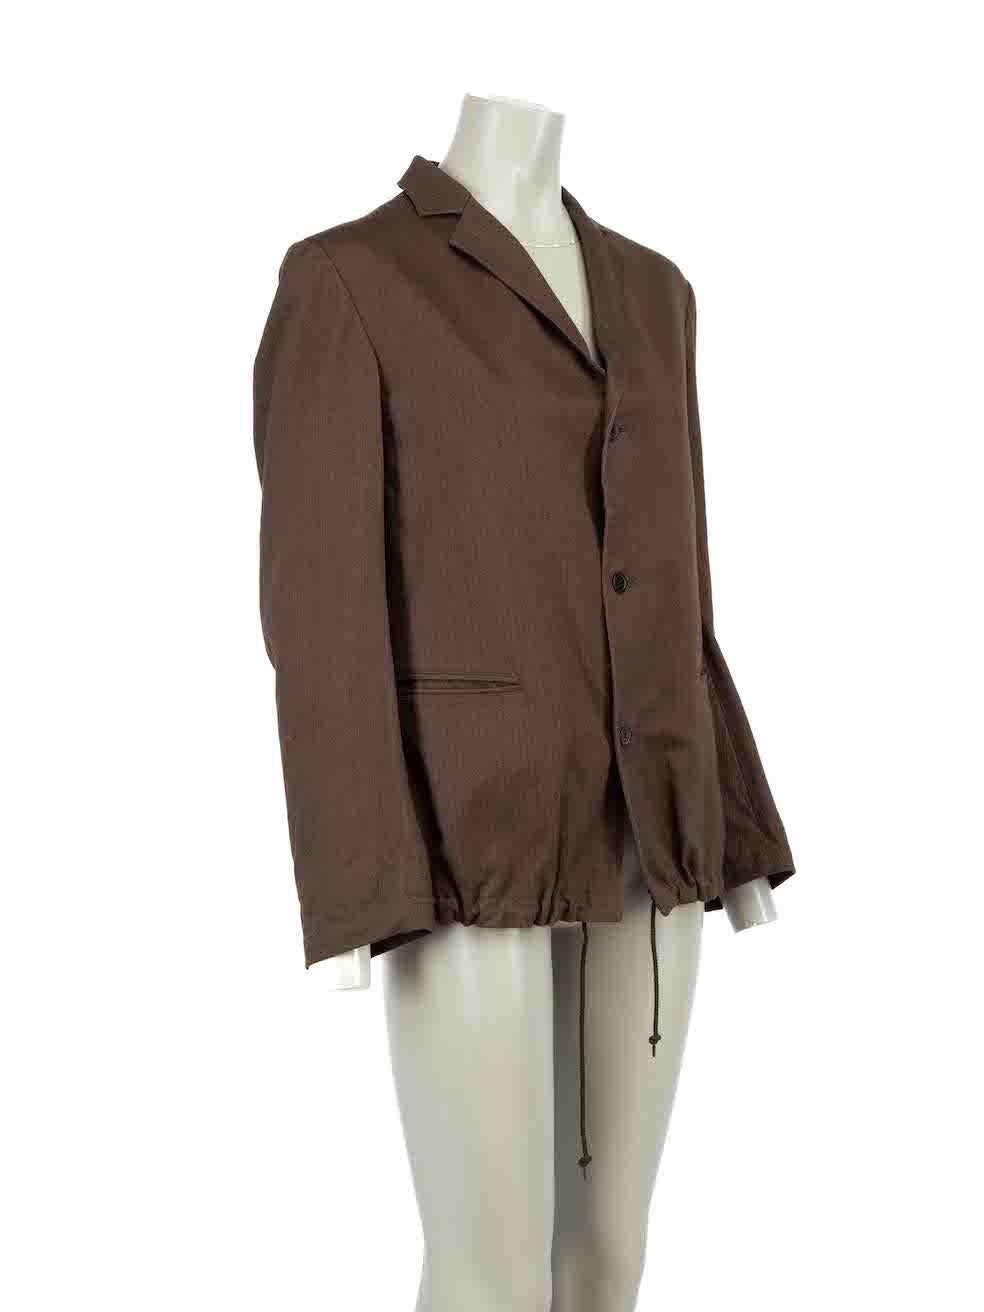 CONDITION is Very good. Hardly any visible wear to jacket is evident on this used Y's Yohji Yamamoto designer resale item.

Details
Brown
Cotton
Utility jacket
Herringbone pattern
Front button up closure
2x Front side pockets
Drawstring hemline
Made